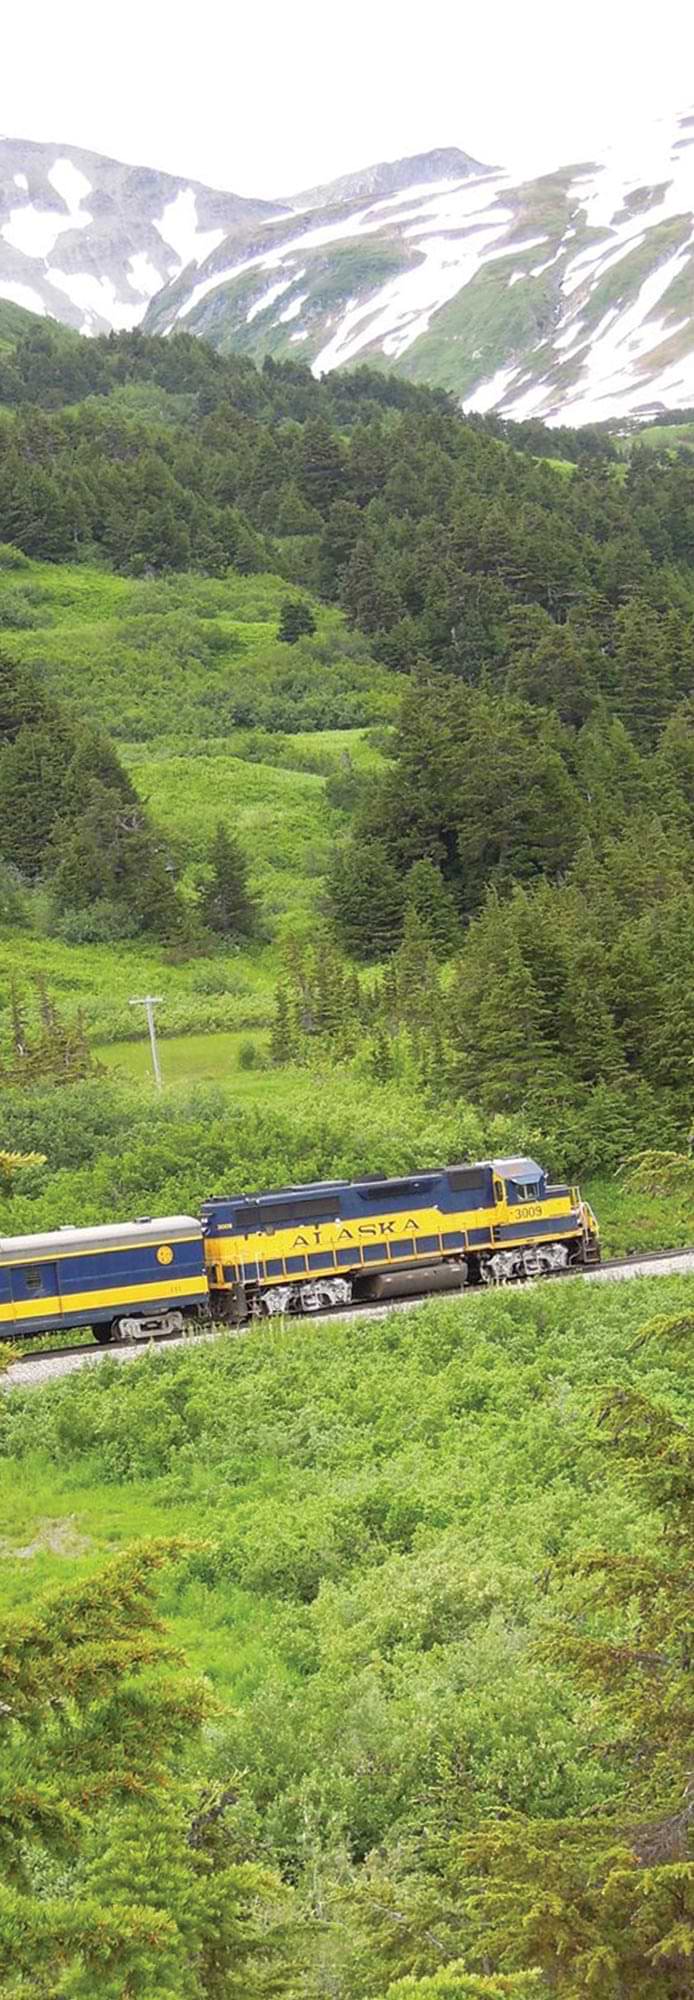 an Alaska Railroad train chugging up a hill in a forested area